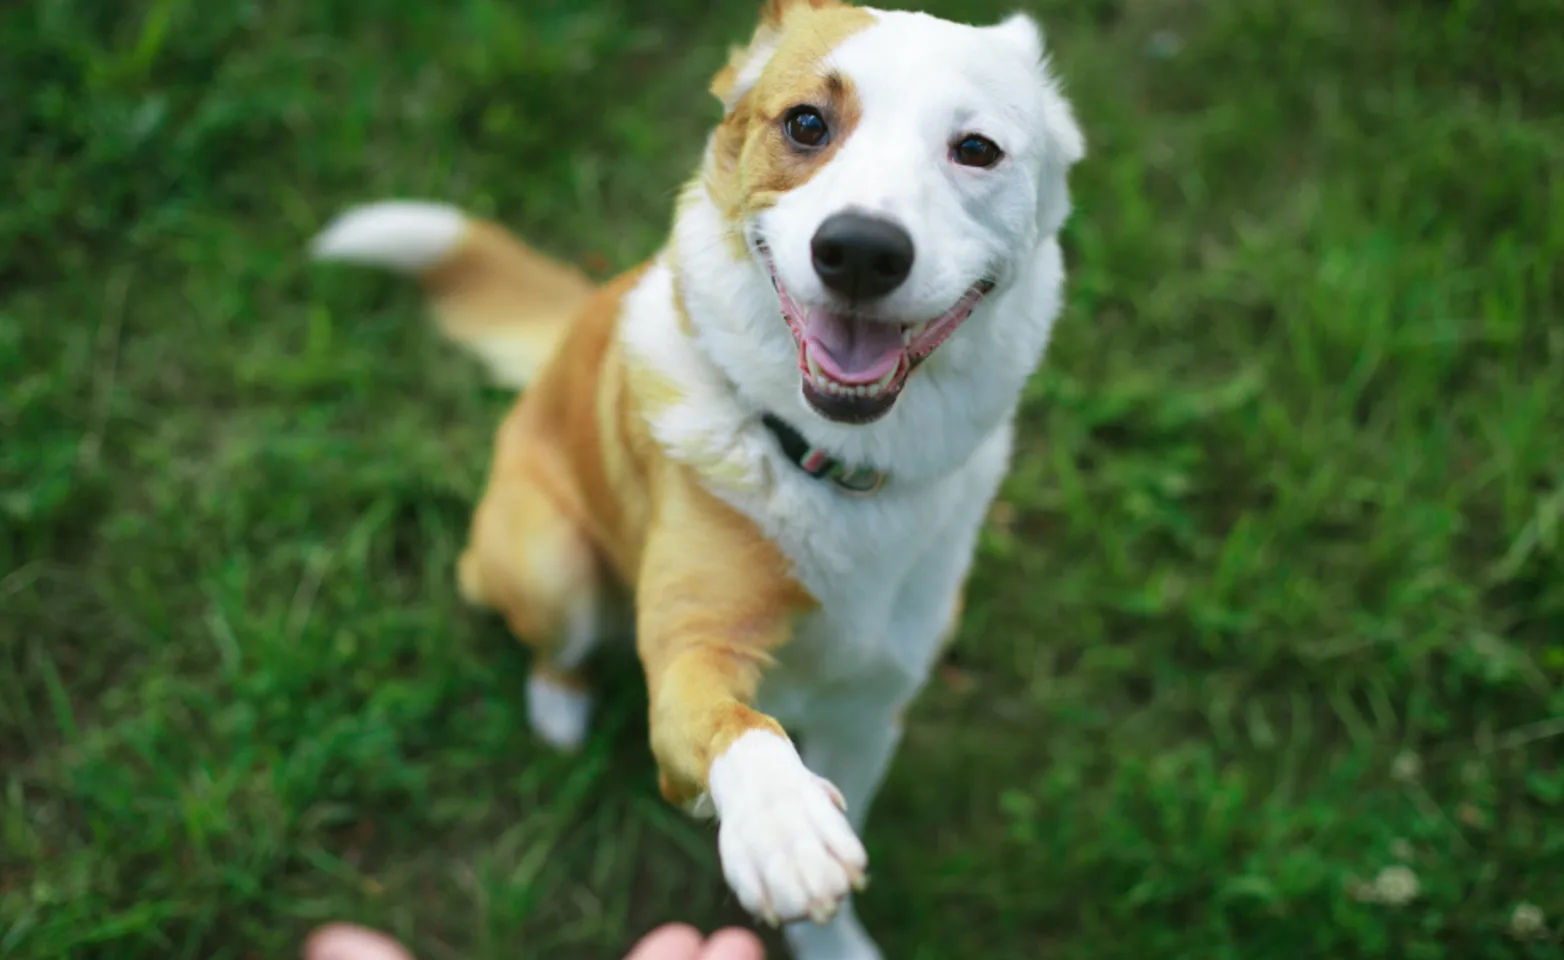 A Brown/White Smiling Dog Holding Out its Paw Outside